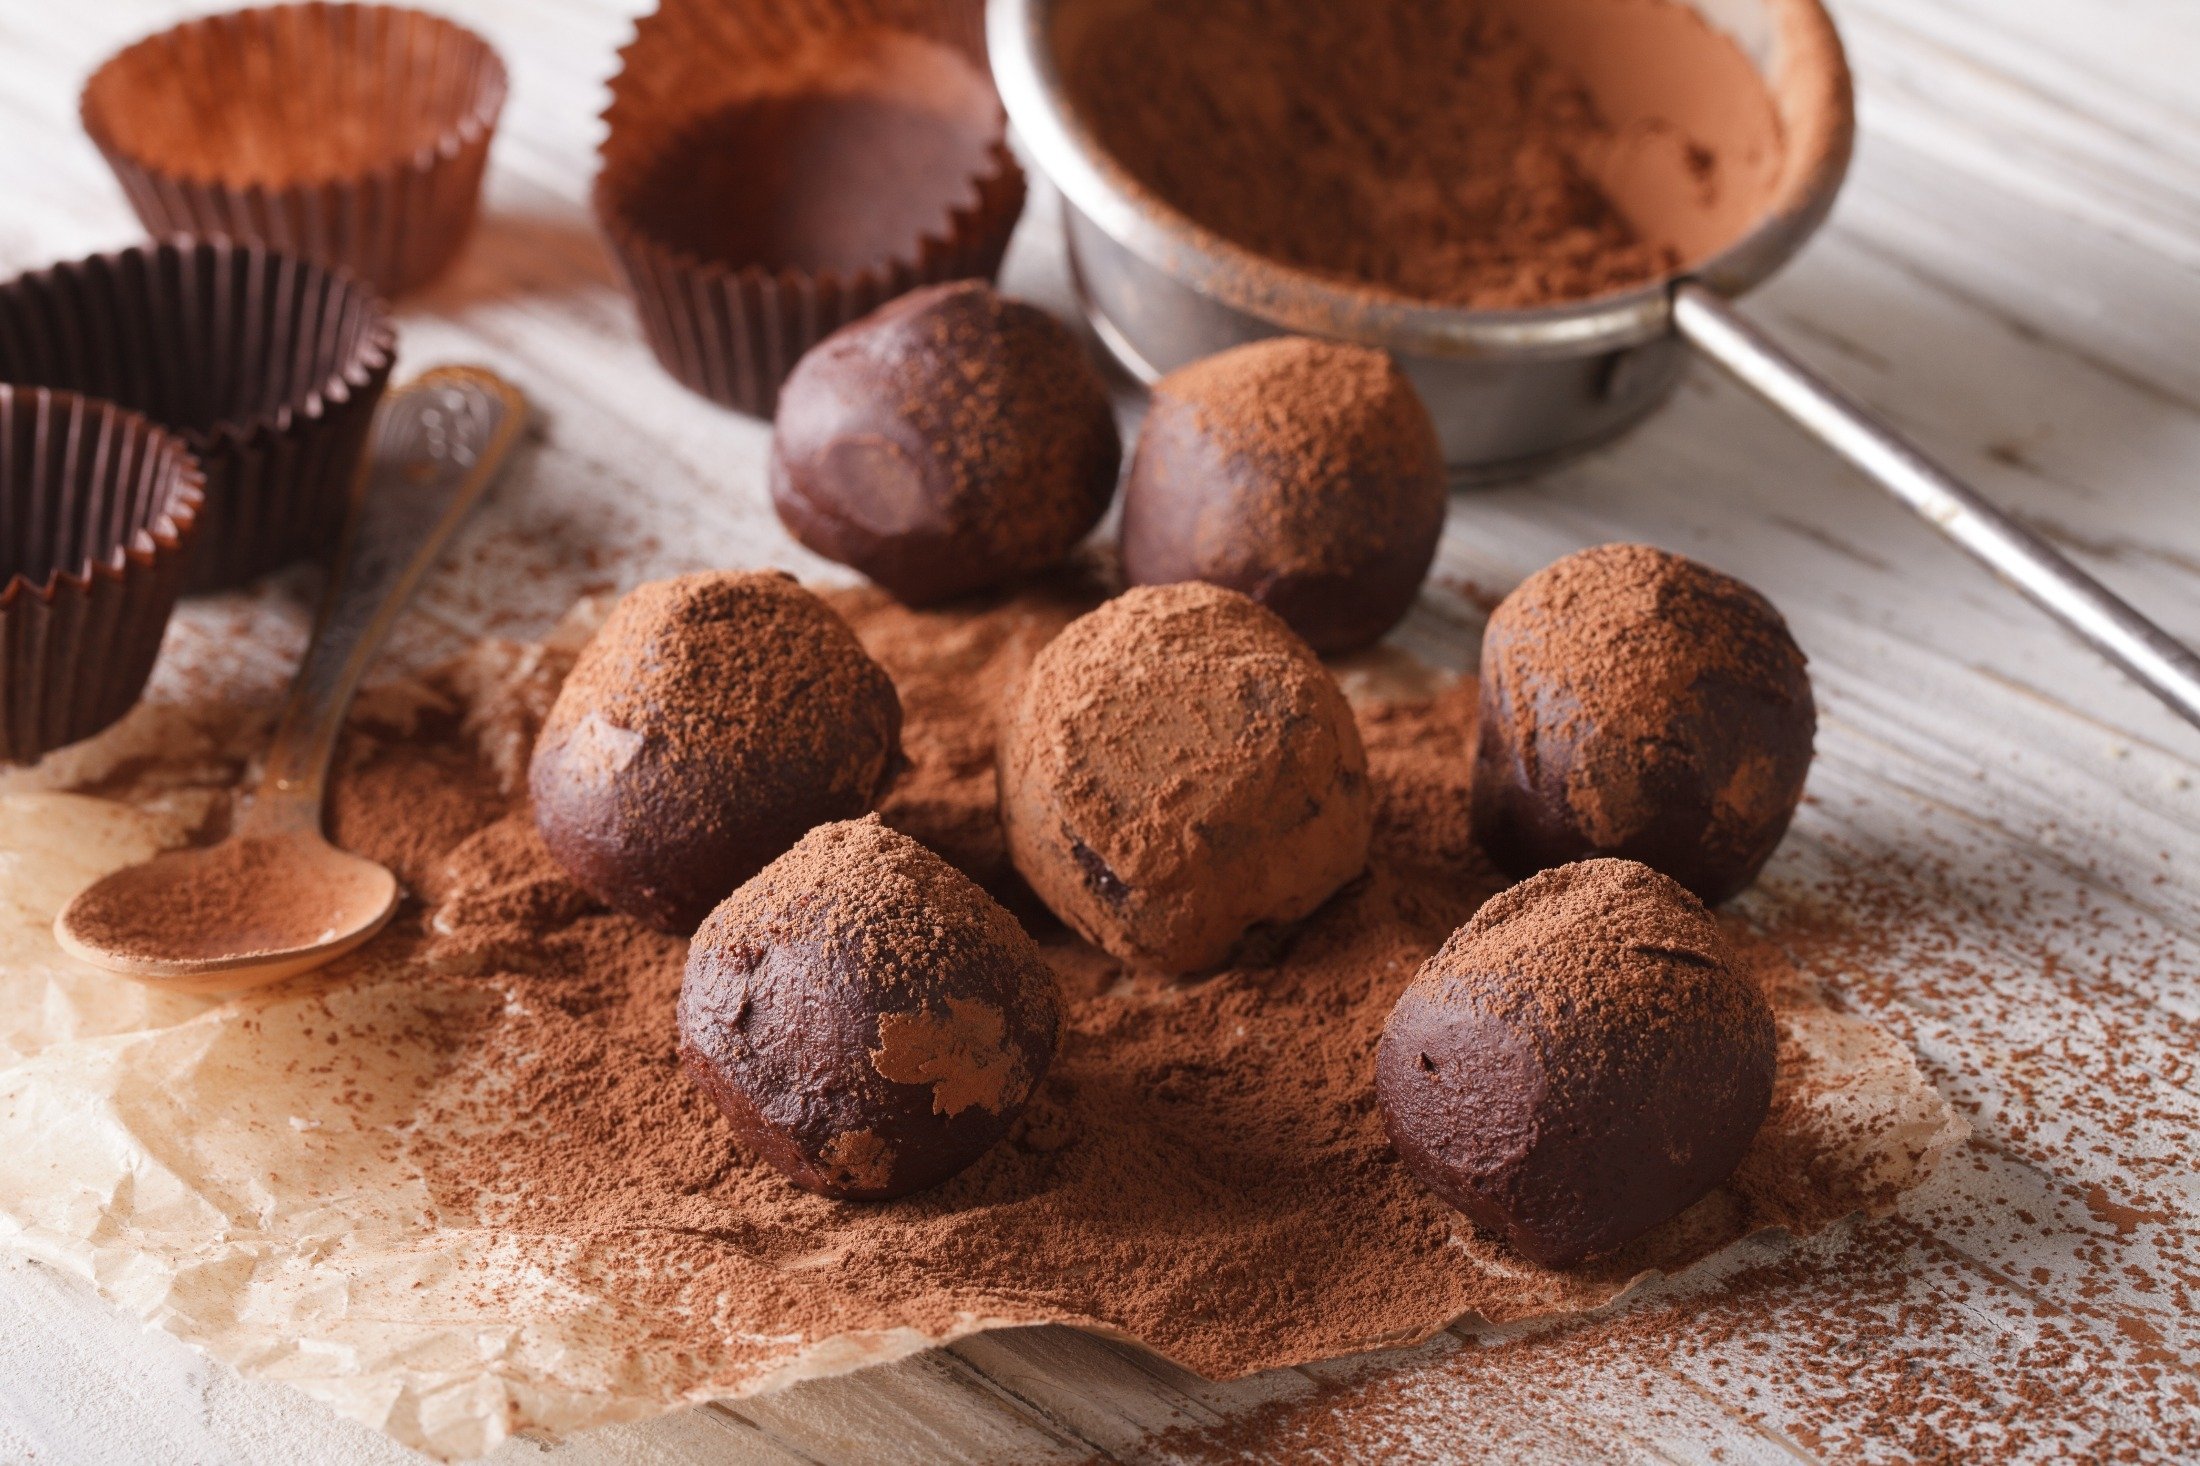 A batch of chocolate truffles amongst other ingredients on a table. (Shutterstock Photo)